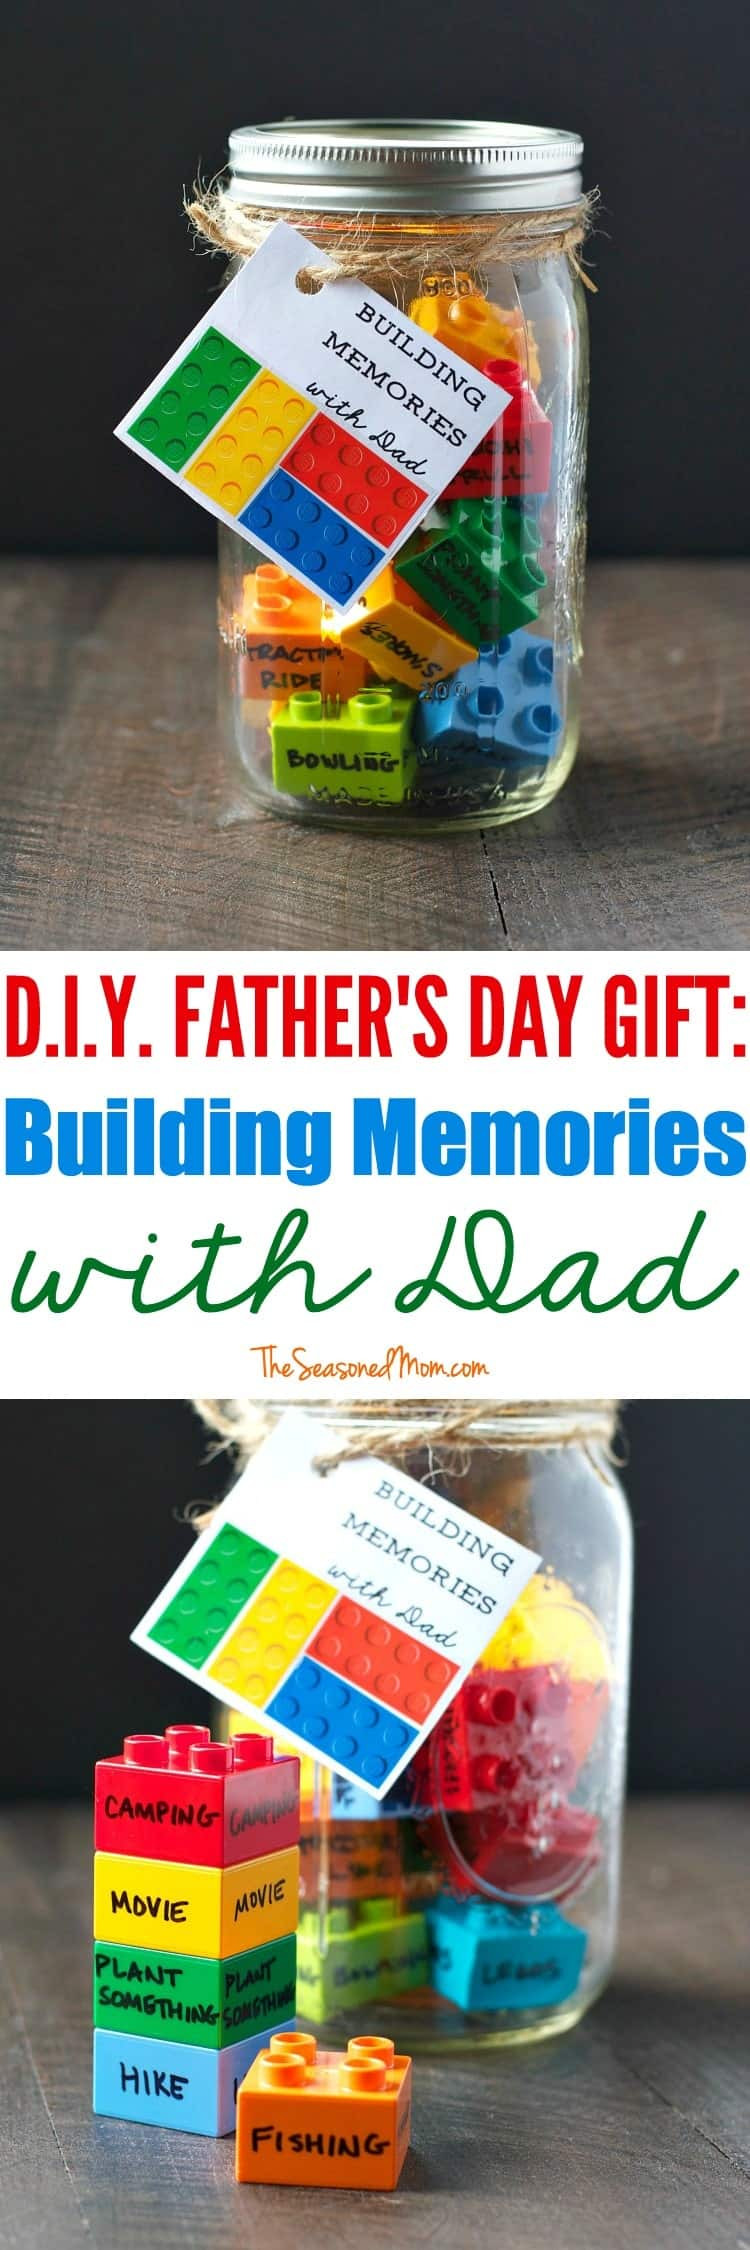 DIY Gifts For Fathers Day
 DIY Father s Day Gift Building Memories with Dad The